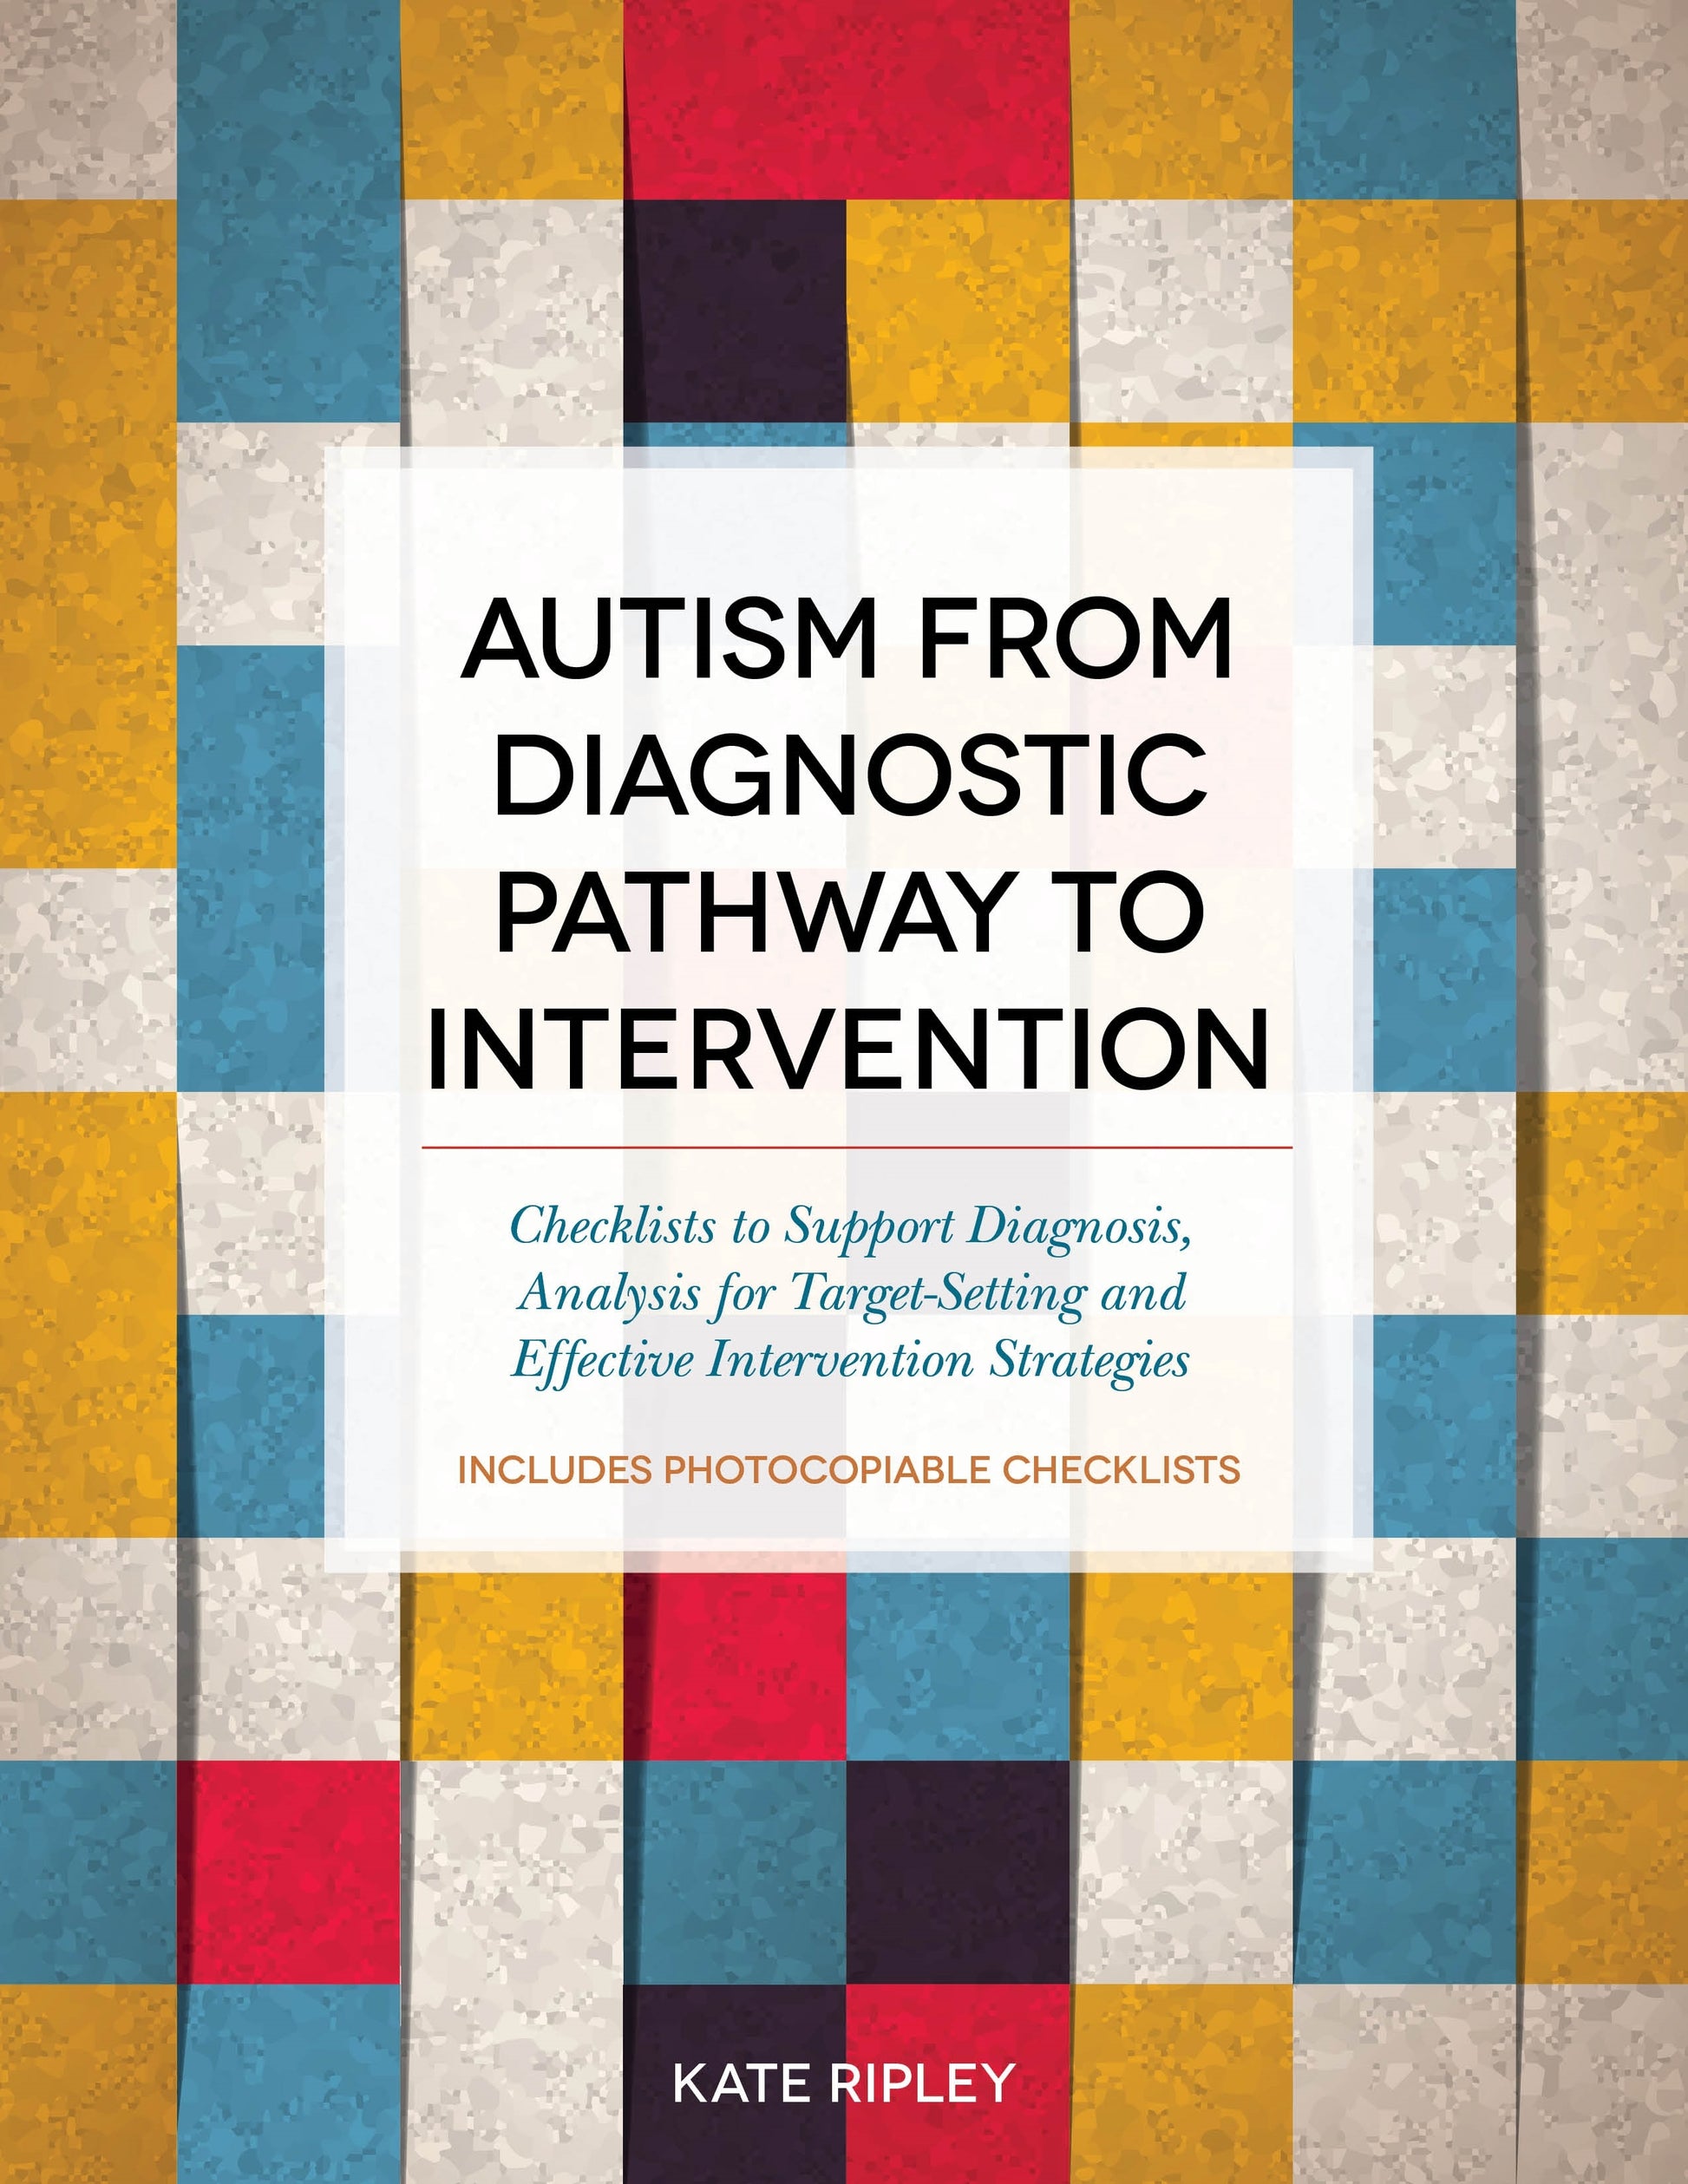 Autism from Diagnostic Pathway to Intervention by Kate Ripley